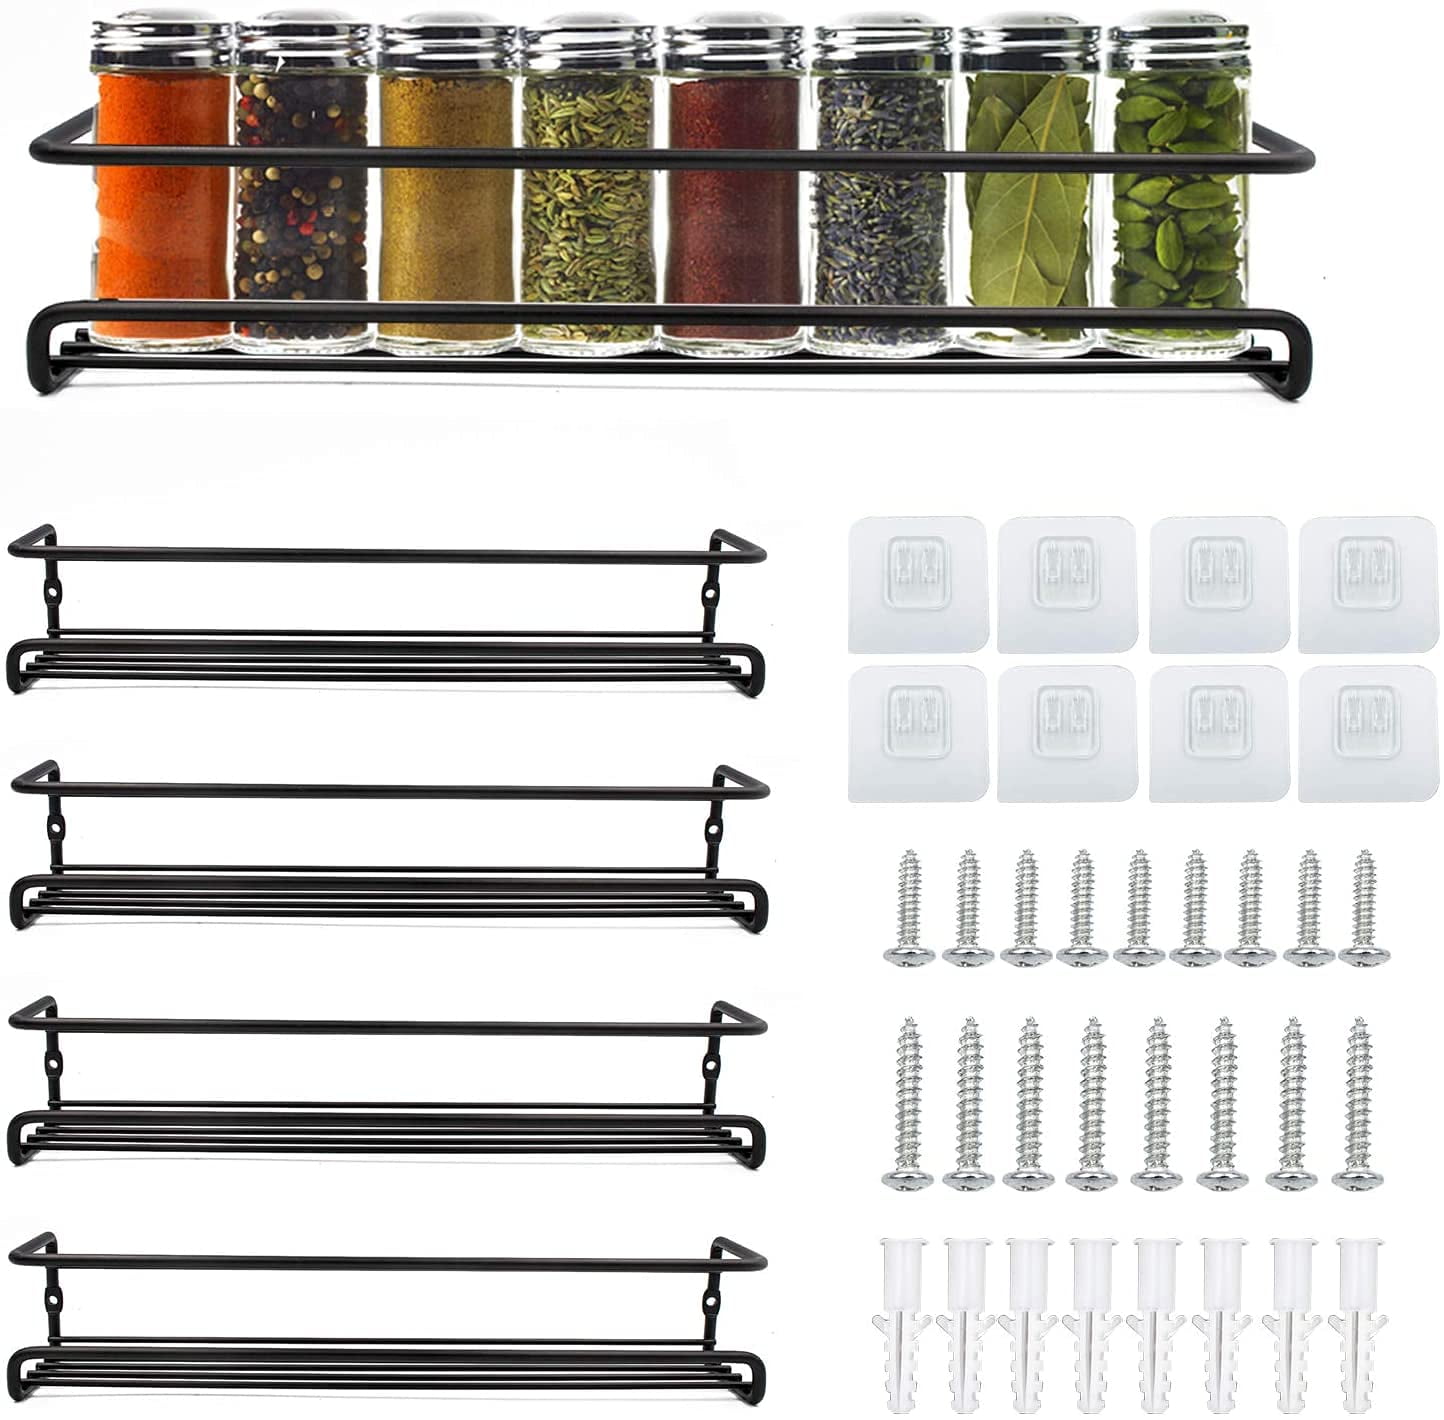 TJ.MOREE 4 Pack Spice Rack Wall Mount Rustic Style Hanging Spice Organizer  for Wall, Kitchen Spice Storage